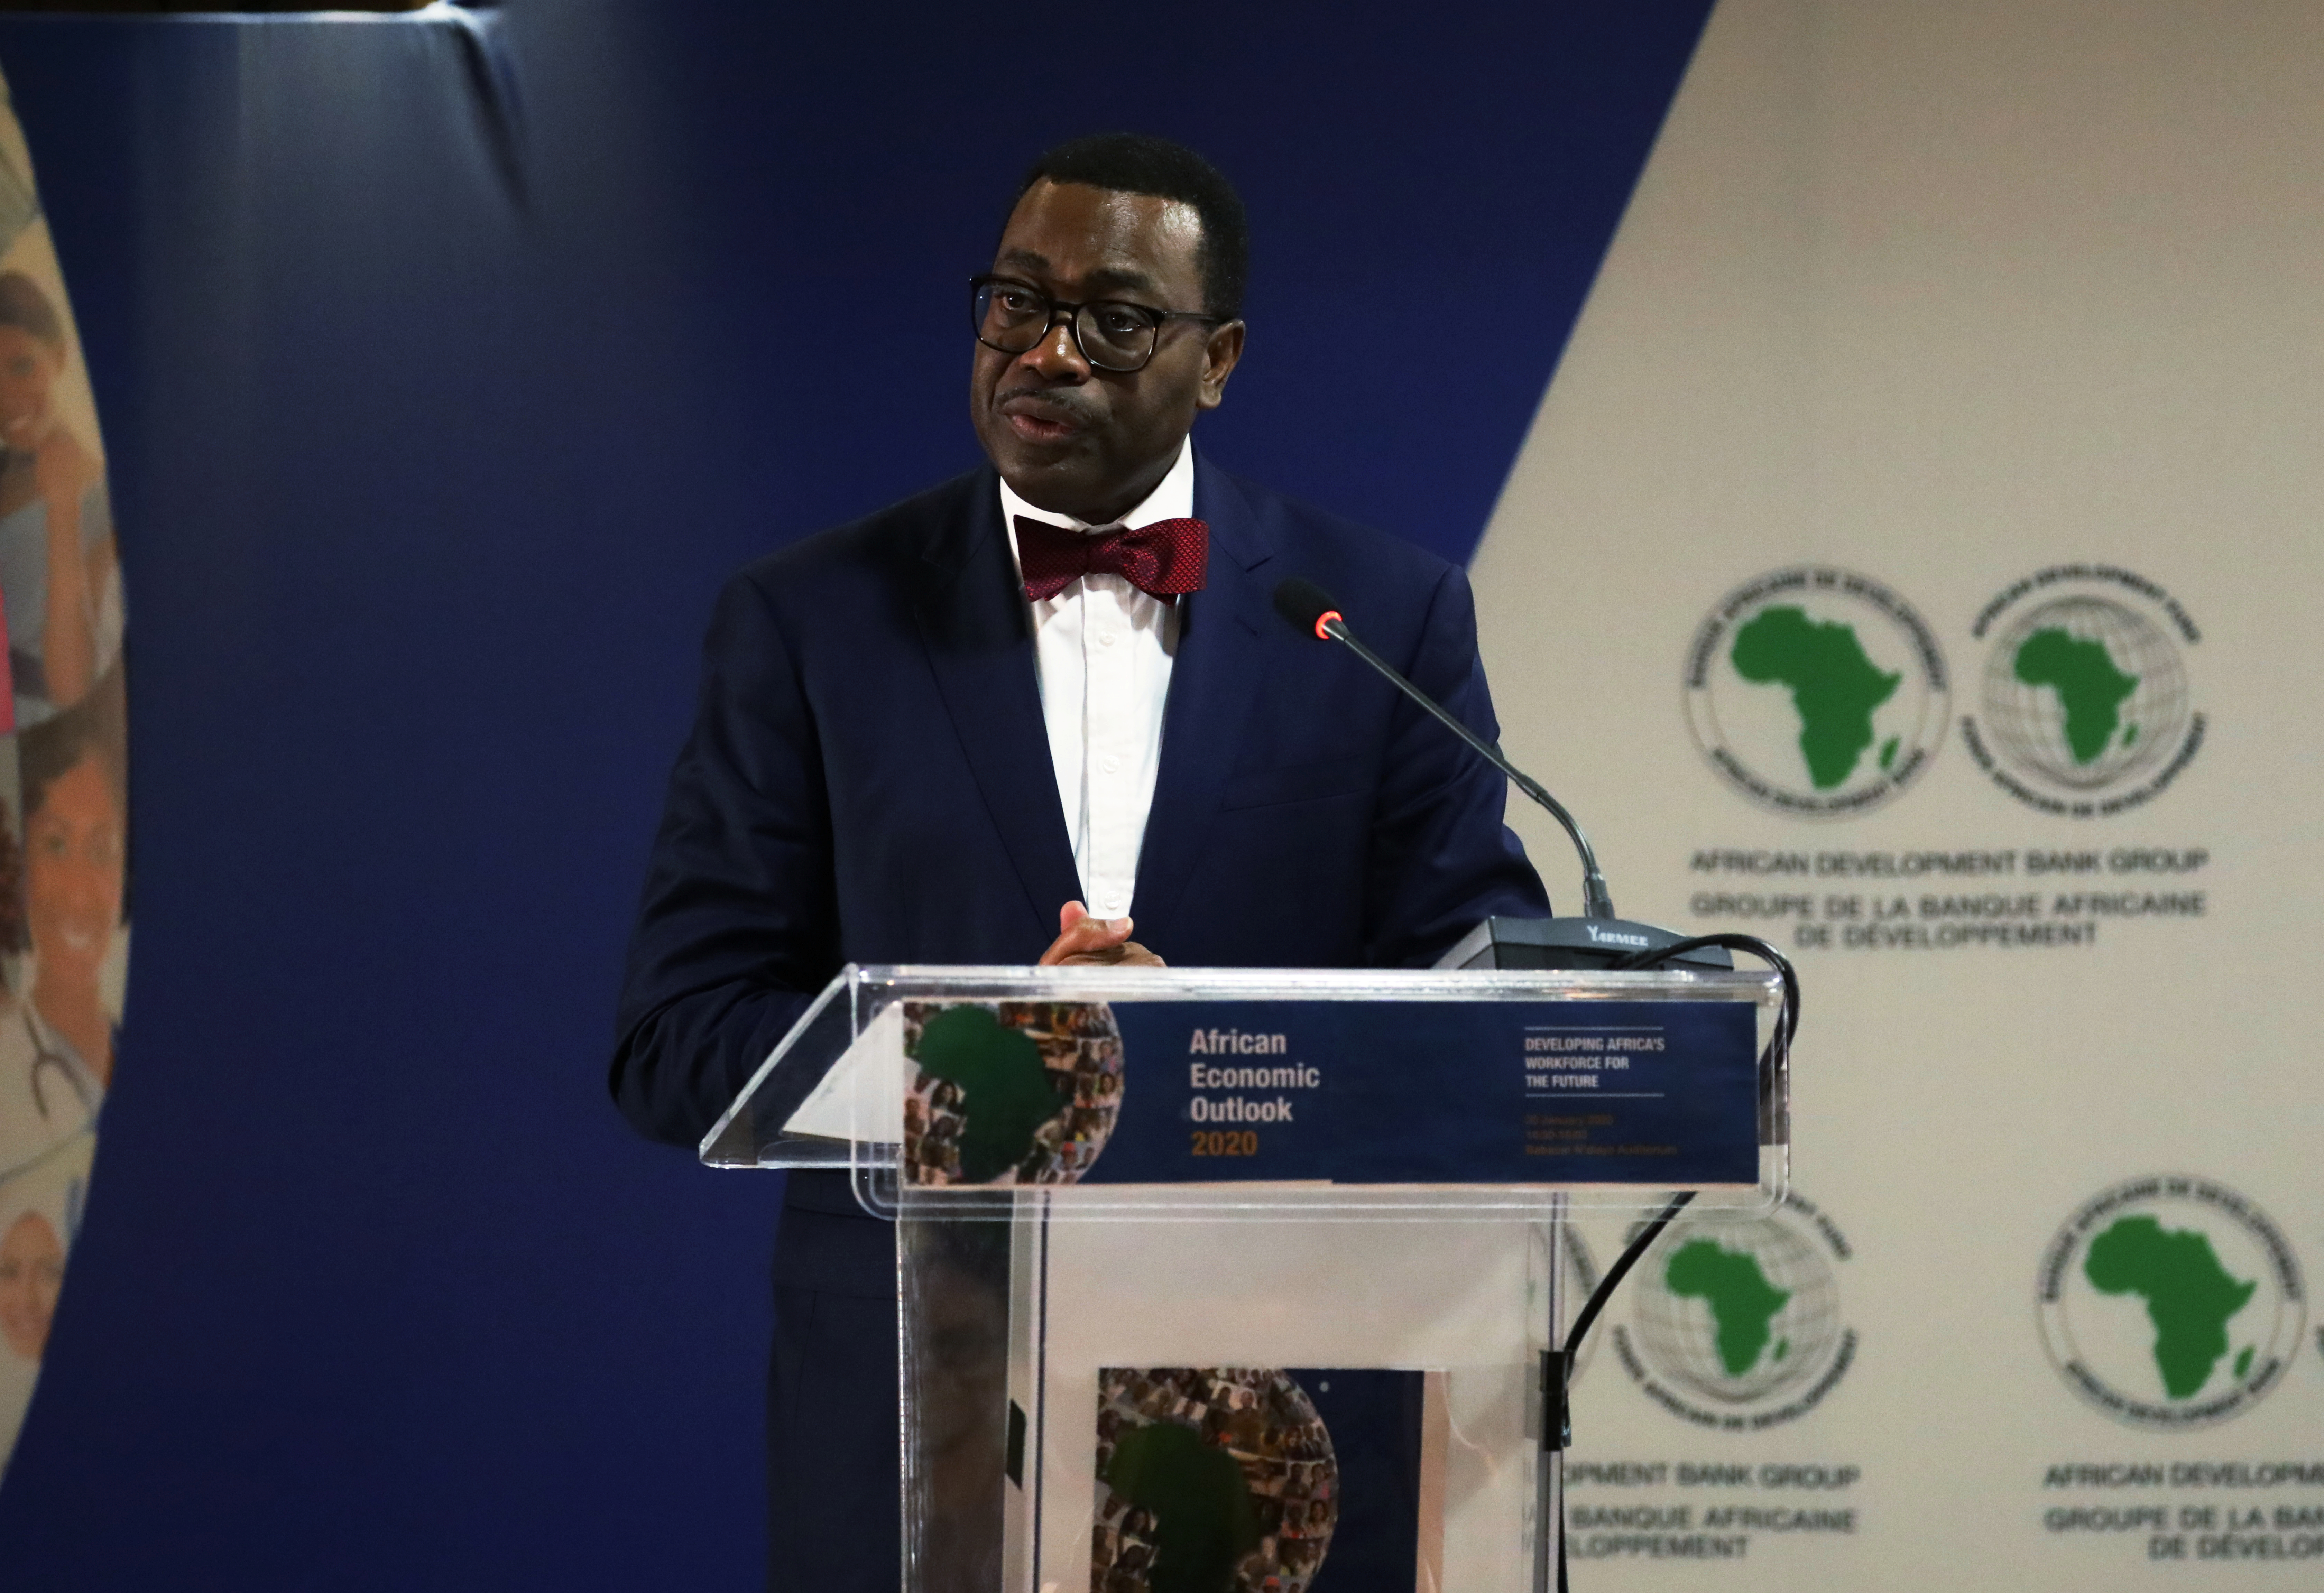 Akinwumi Ayodeji Adesina, President of the African Development Bank Group, attends a meeting of the 2020 African Economic Outlook report in Abidjan